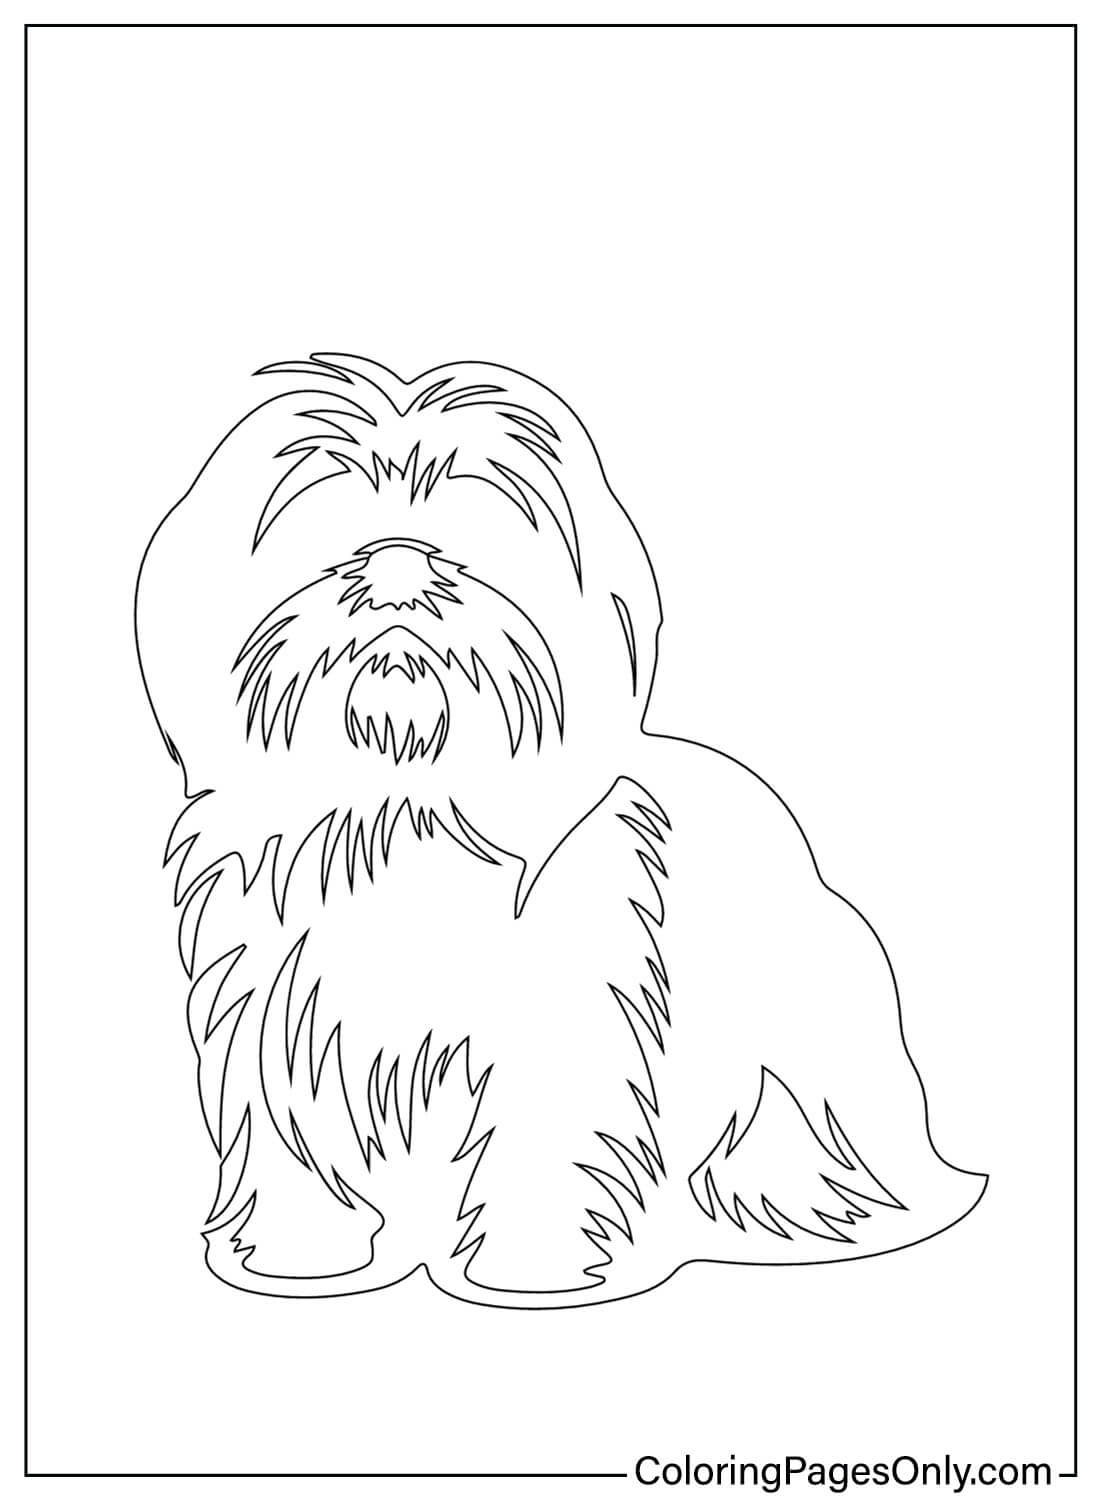 Coloring Pages Shih Tzu from Shih Tzu